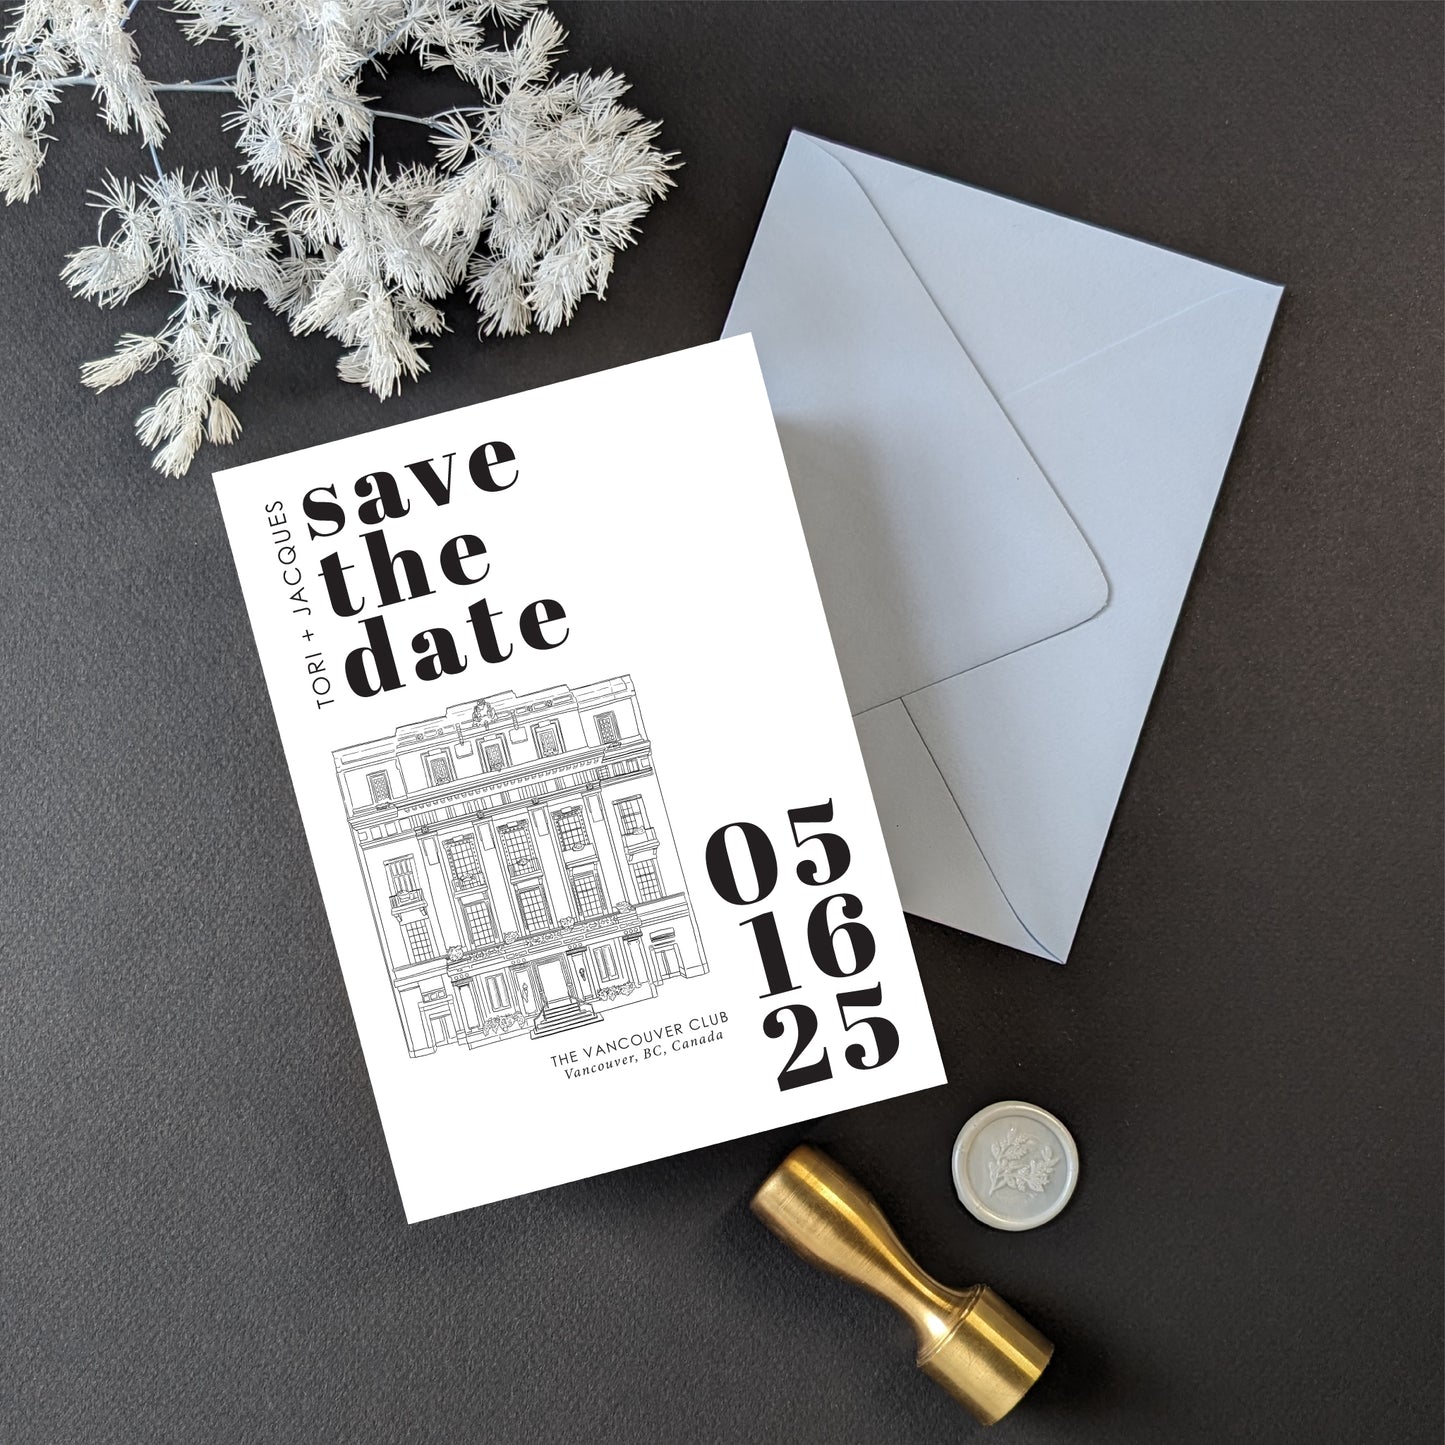 Venue Outline Illustration with Bold Modern Text